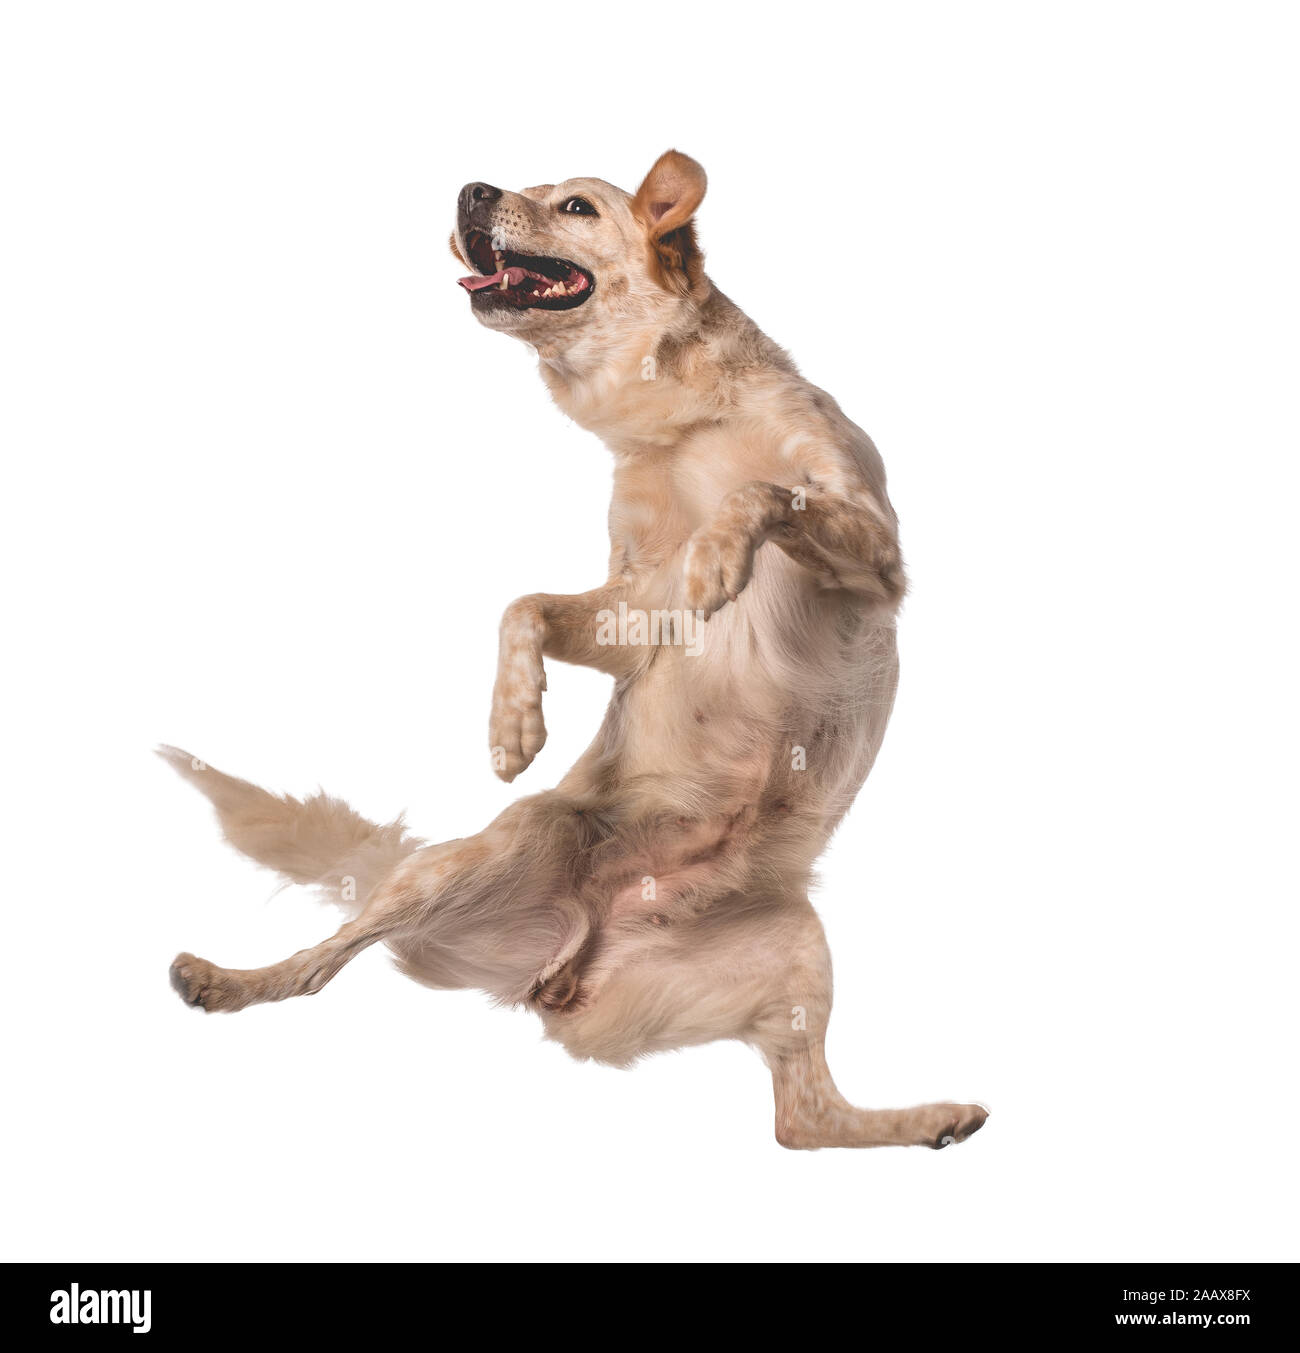 Lovely mutts dog jumping for happiness Stock Photo